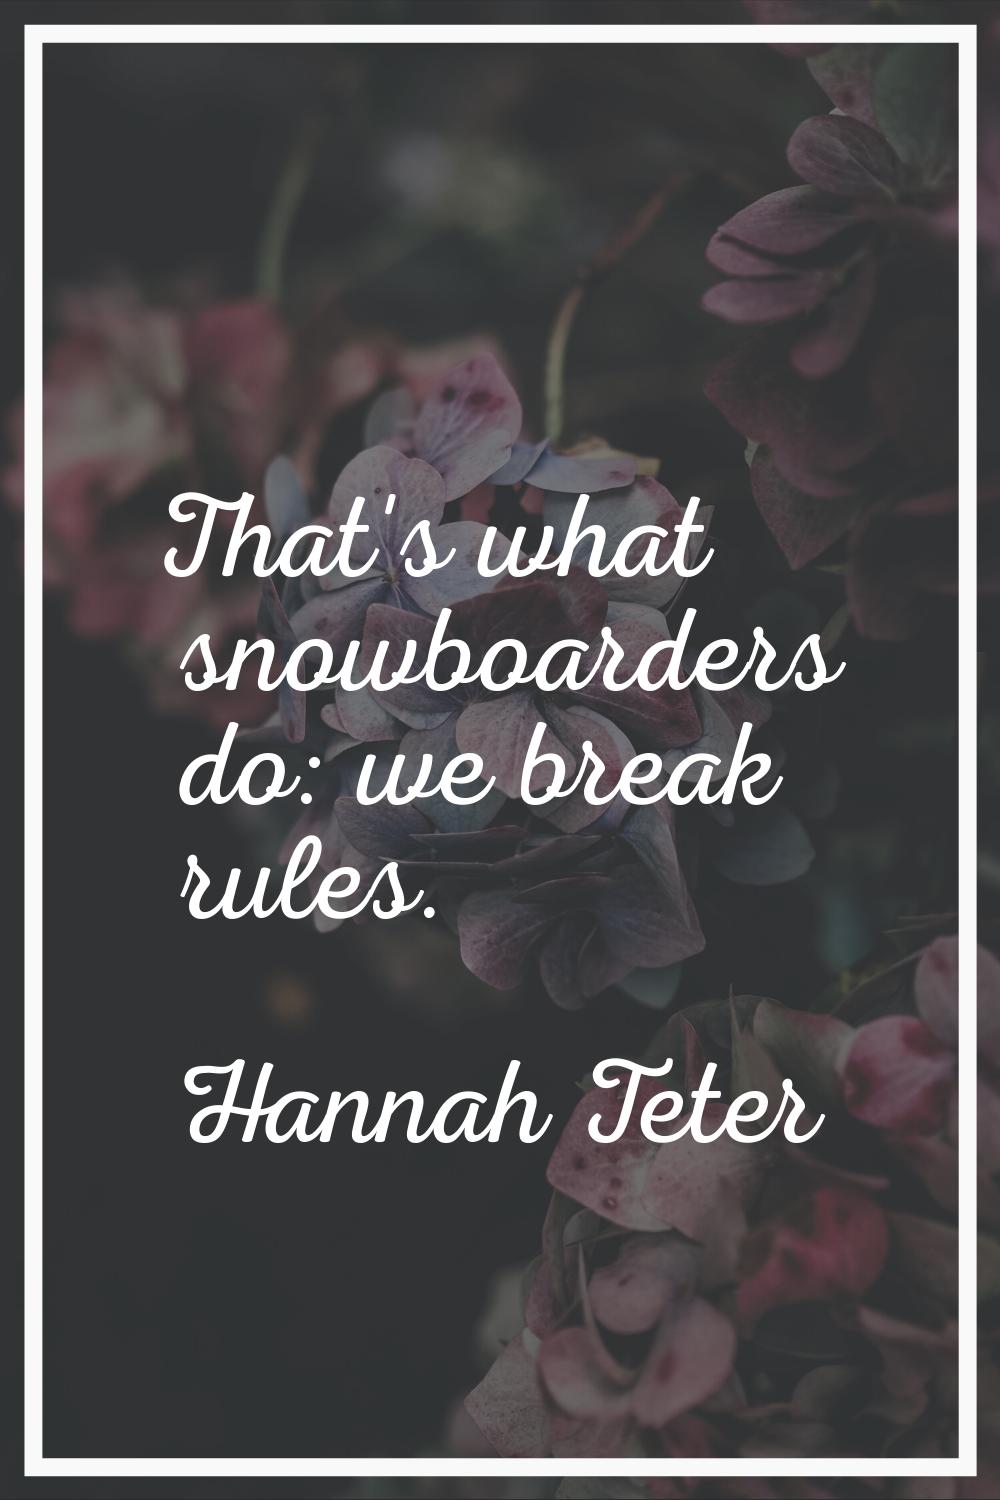 That's what snowboarders do: we break rules.